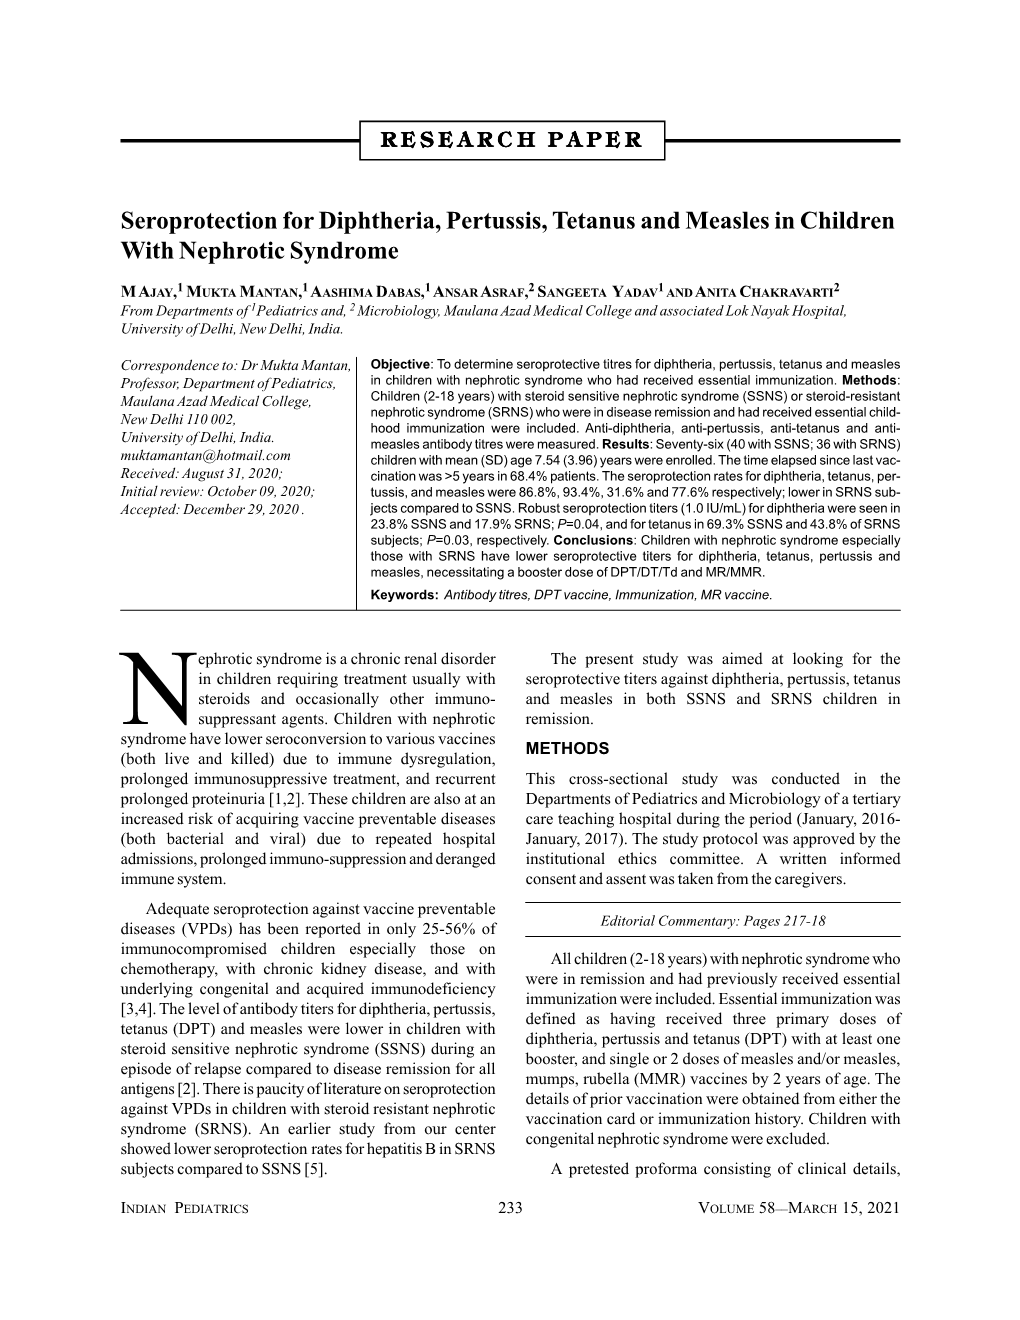 Seroprotection for Diphtheria, Pertussis, Tetanus and Measles in Children with Nephrotic Syndrome